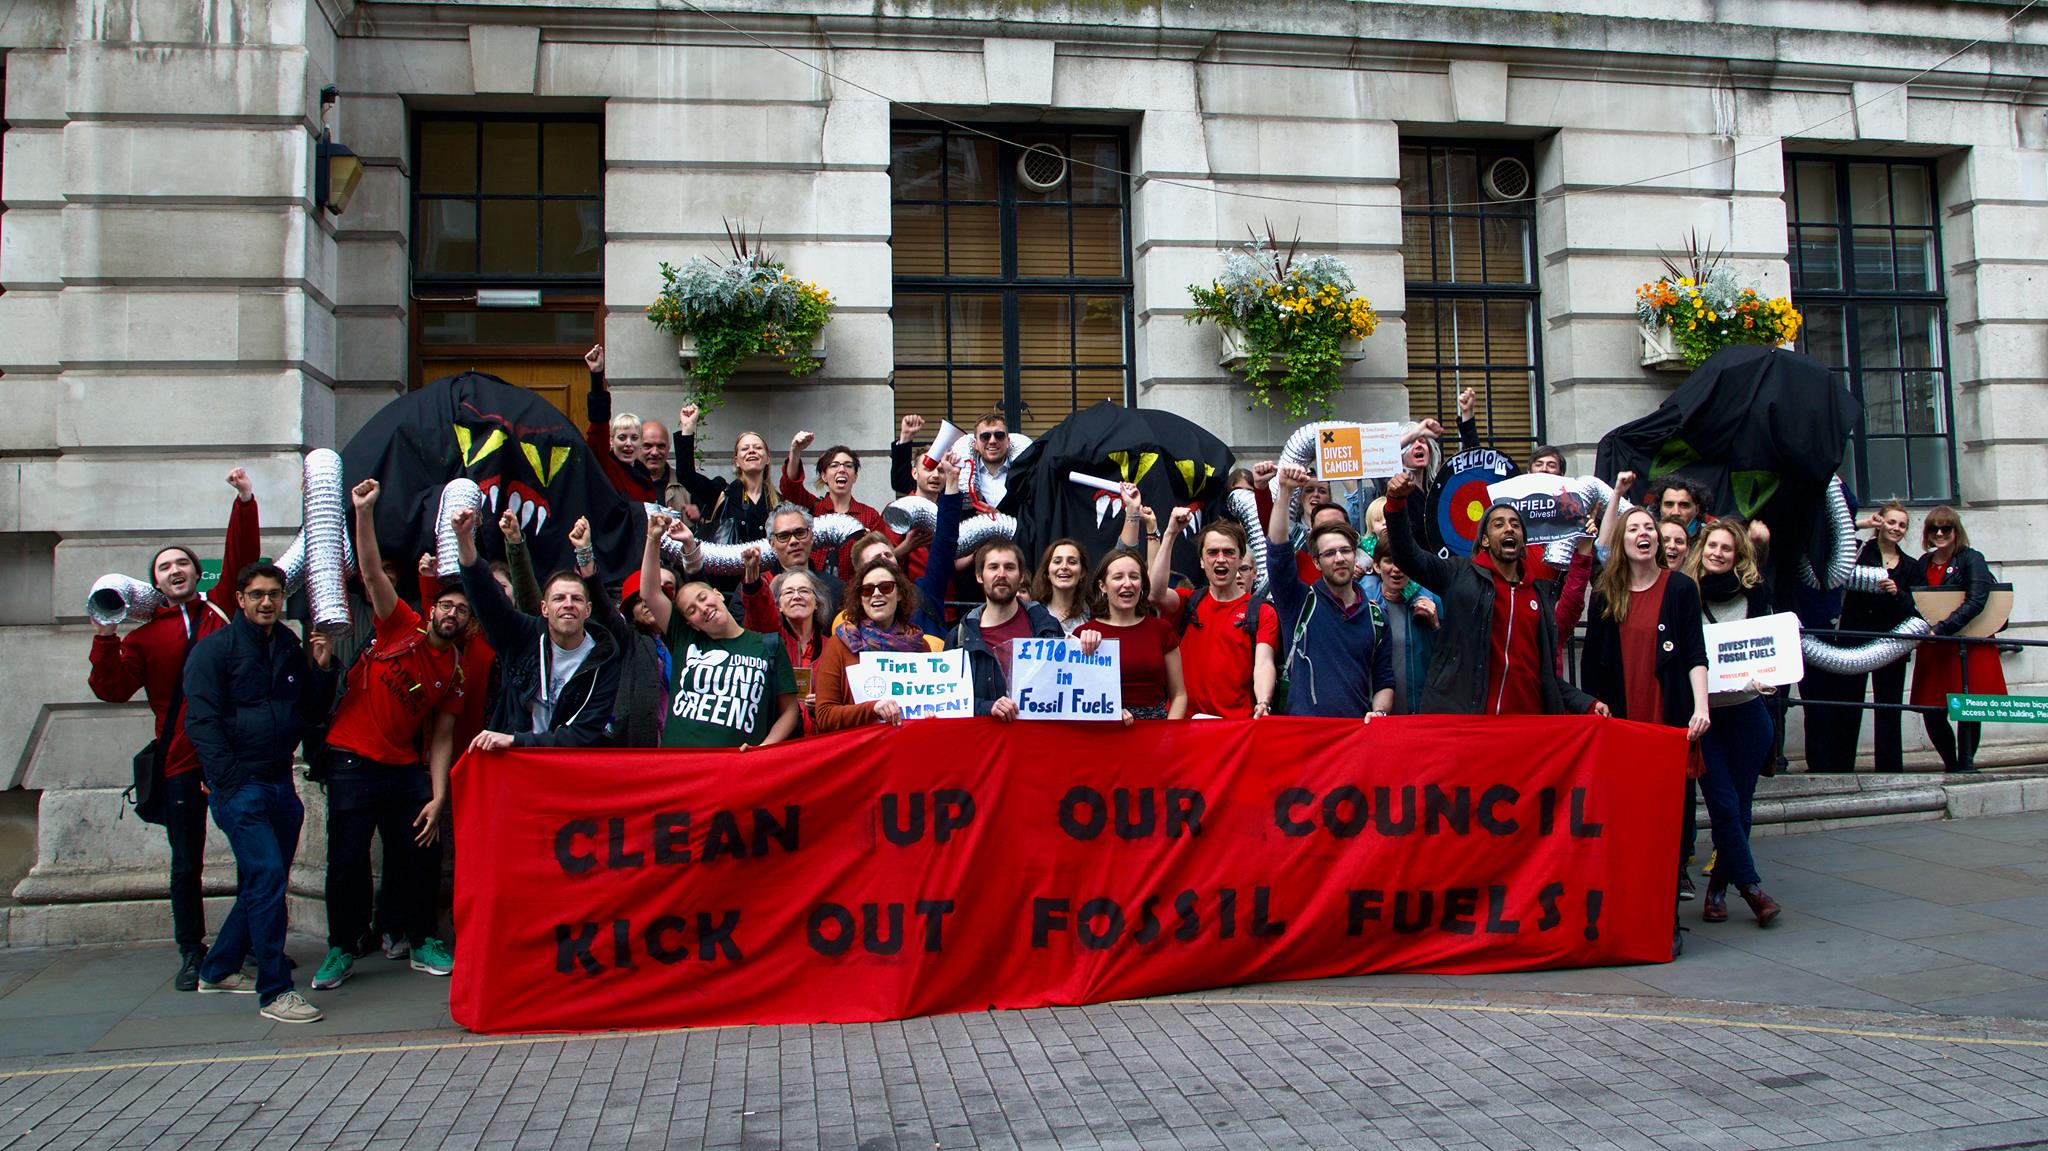 People protesting outside a building about divestment